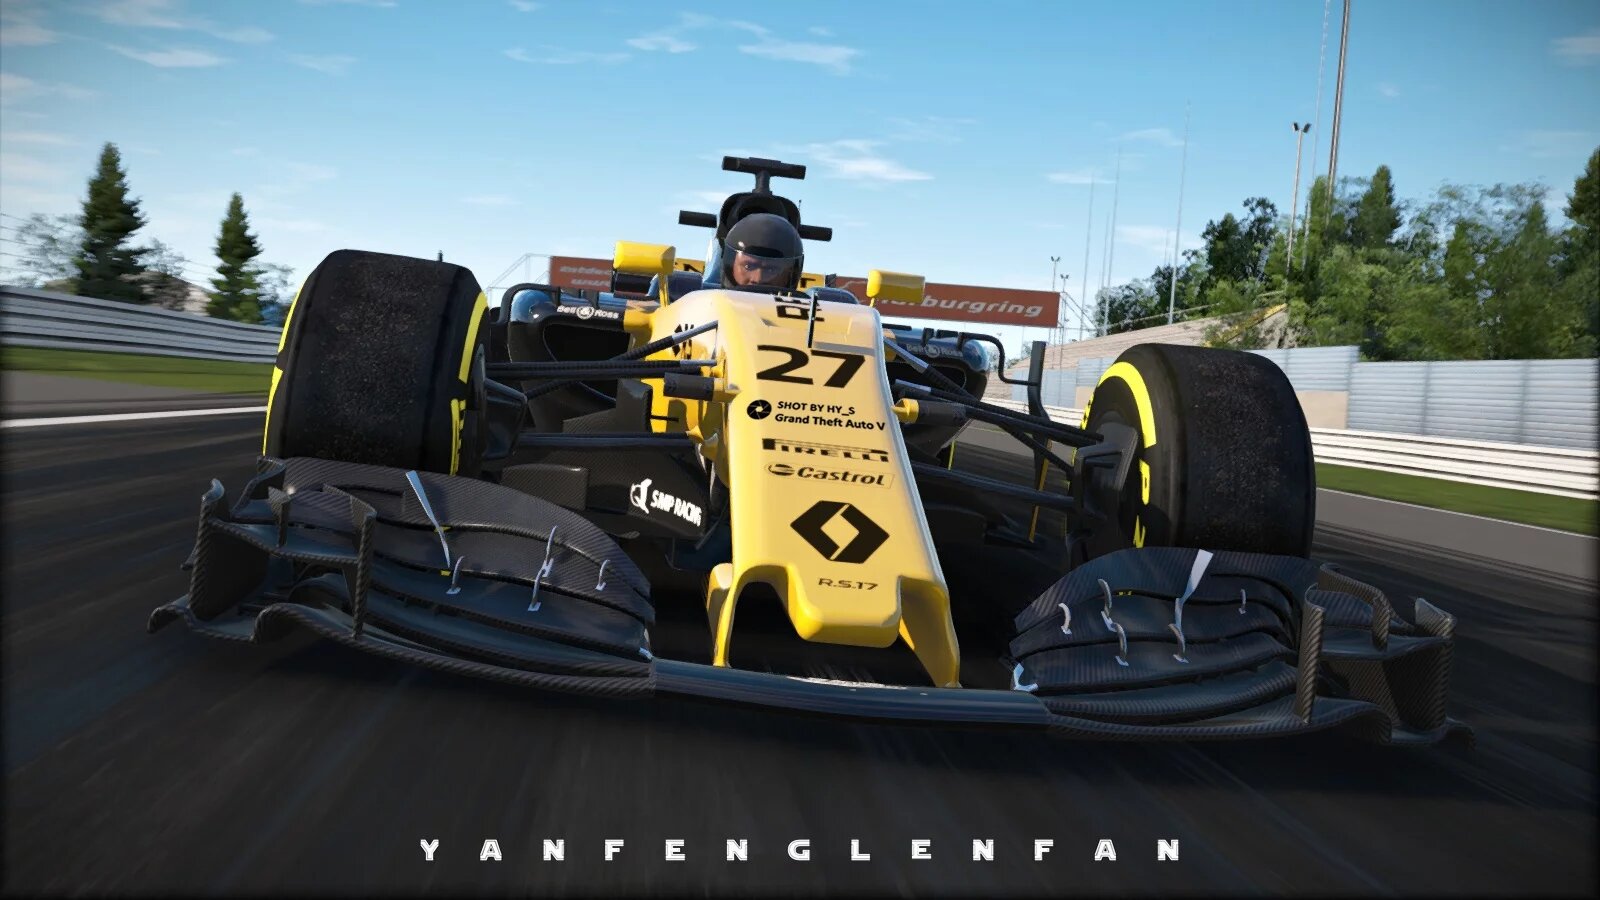 Renault RS17 2017